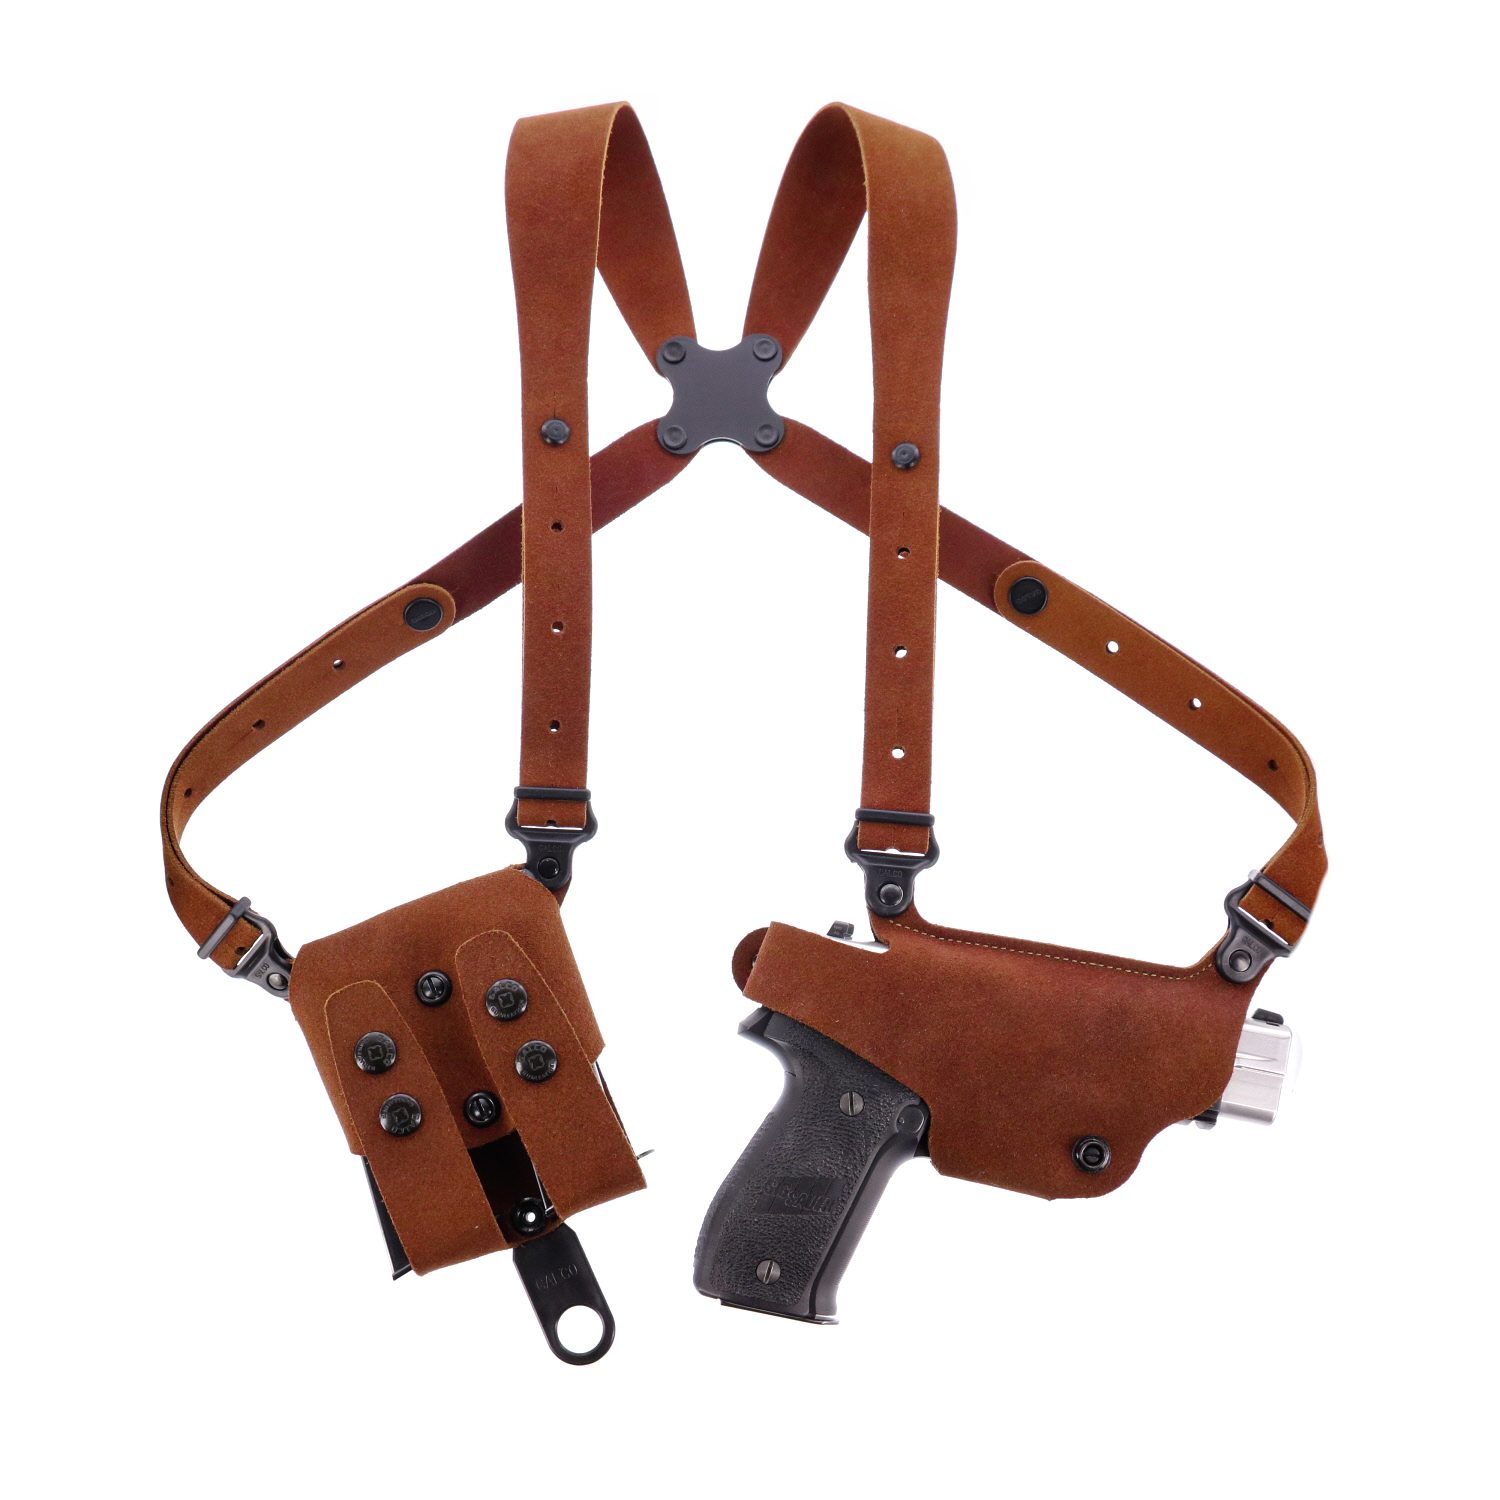 Galco Gunleather Classic Lite 2.0 Shoulder System - Tactical & Duty Gear